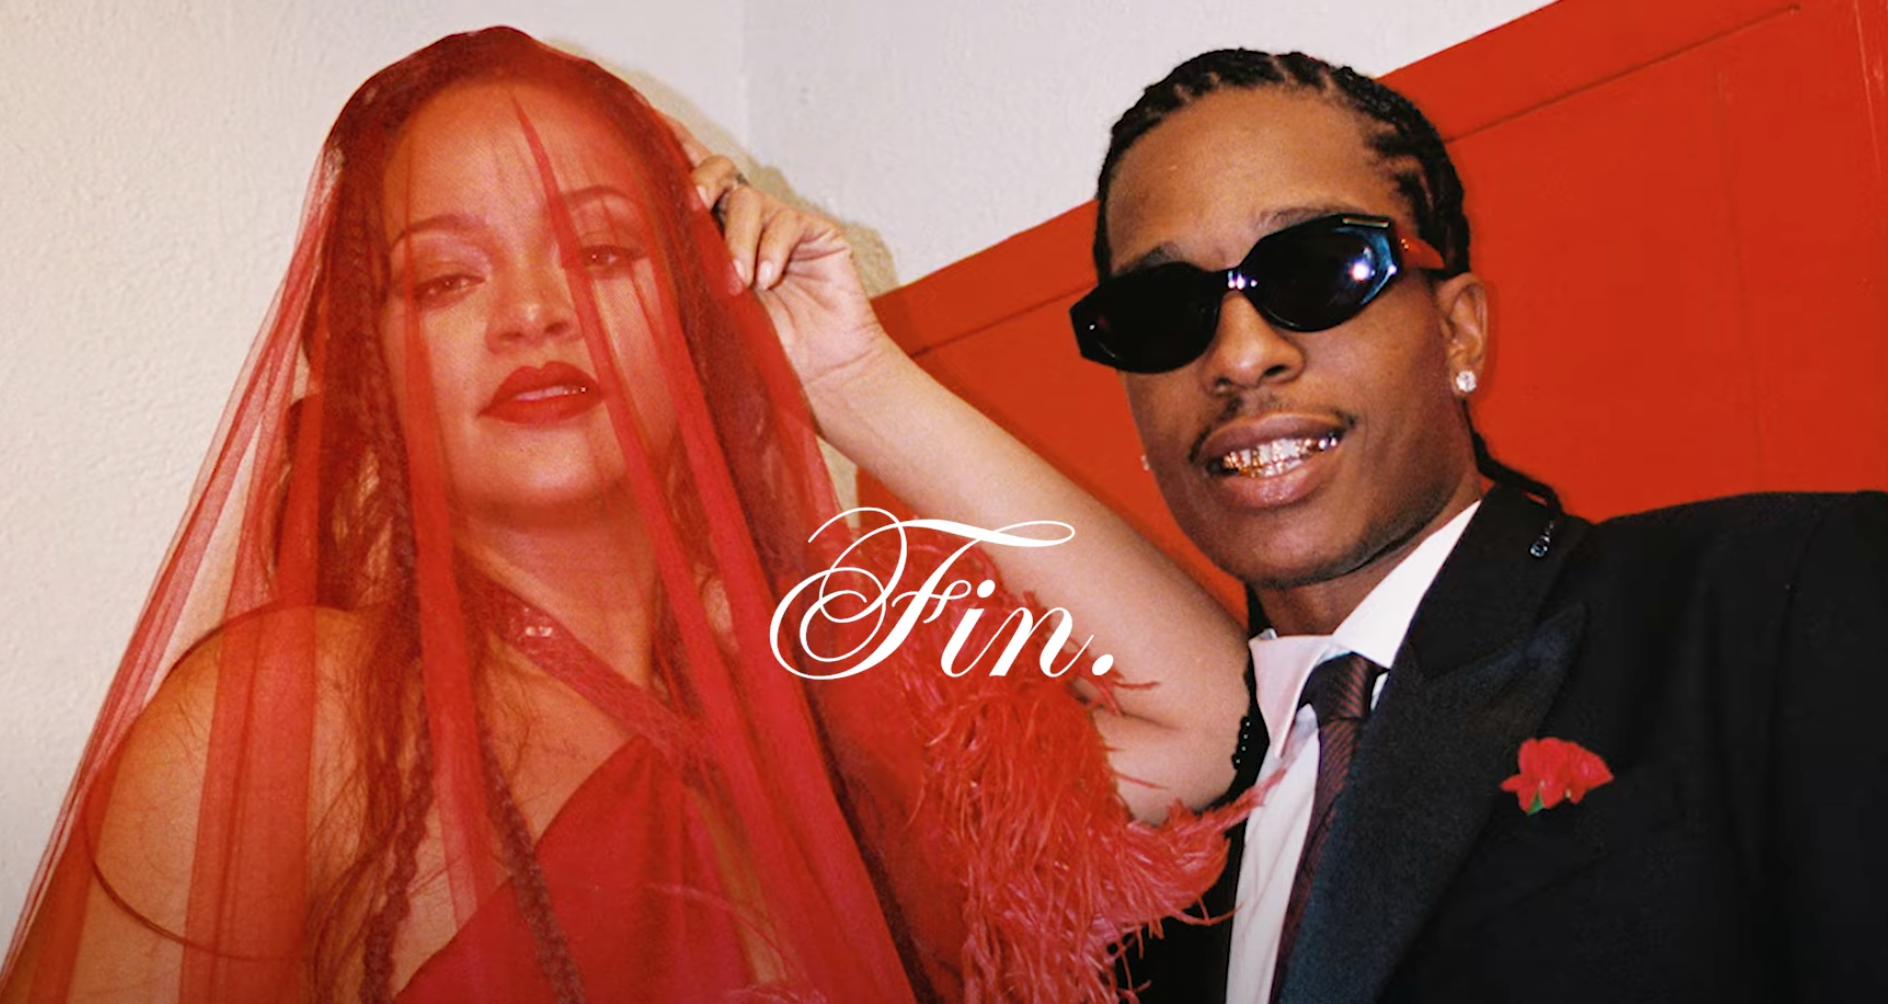 A$AP Rocky and Rihanna in the "D.M.B." video